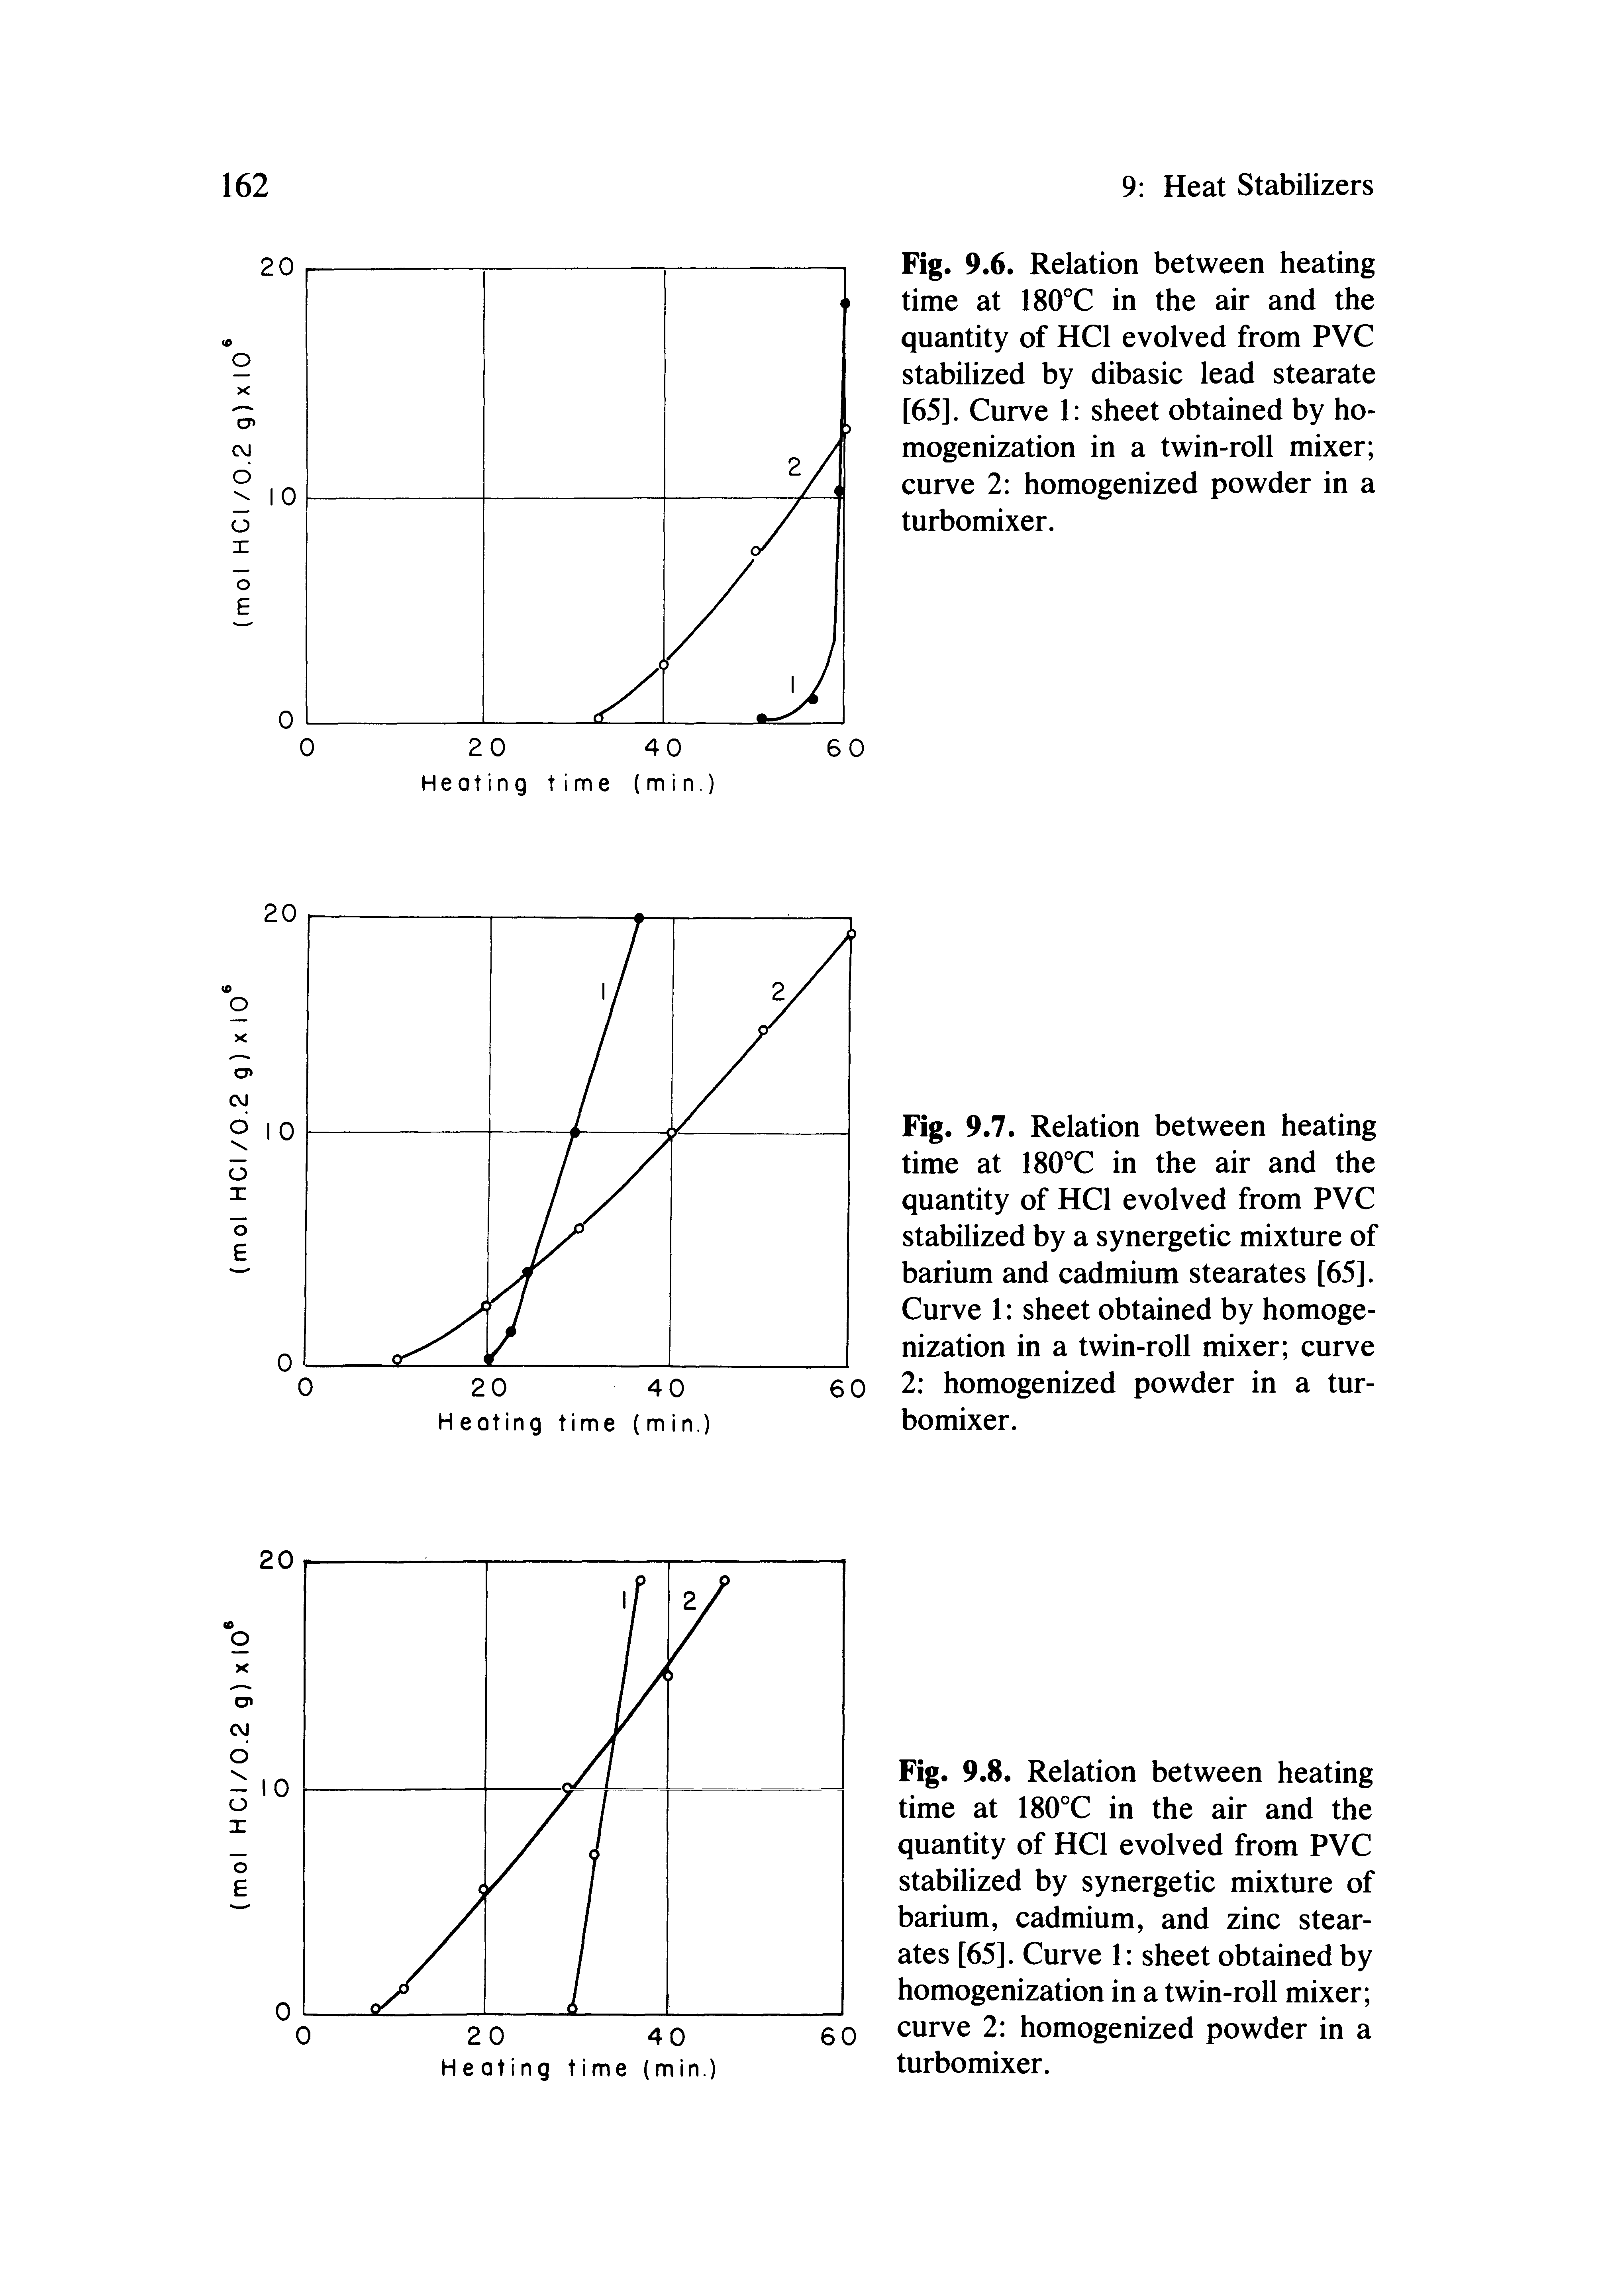 Fig. 9.6. Relation between heating time at 180°C in the air and the quantity of HCl evolved from PVC stabilized by dibasic lead stearate [65]. Curve 1 sheet obtained by homogenization in a twin-roll mixer curve 2 homogenized powder in a turbomixer.